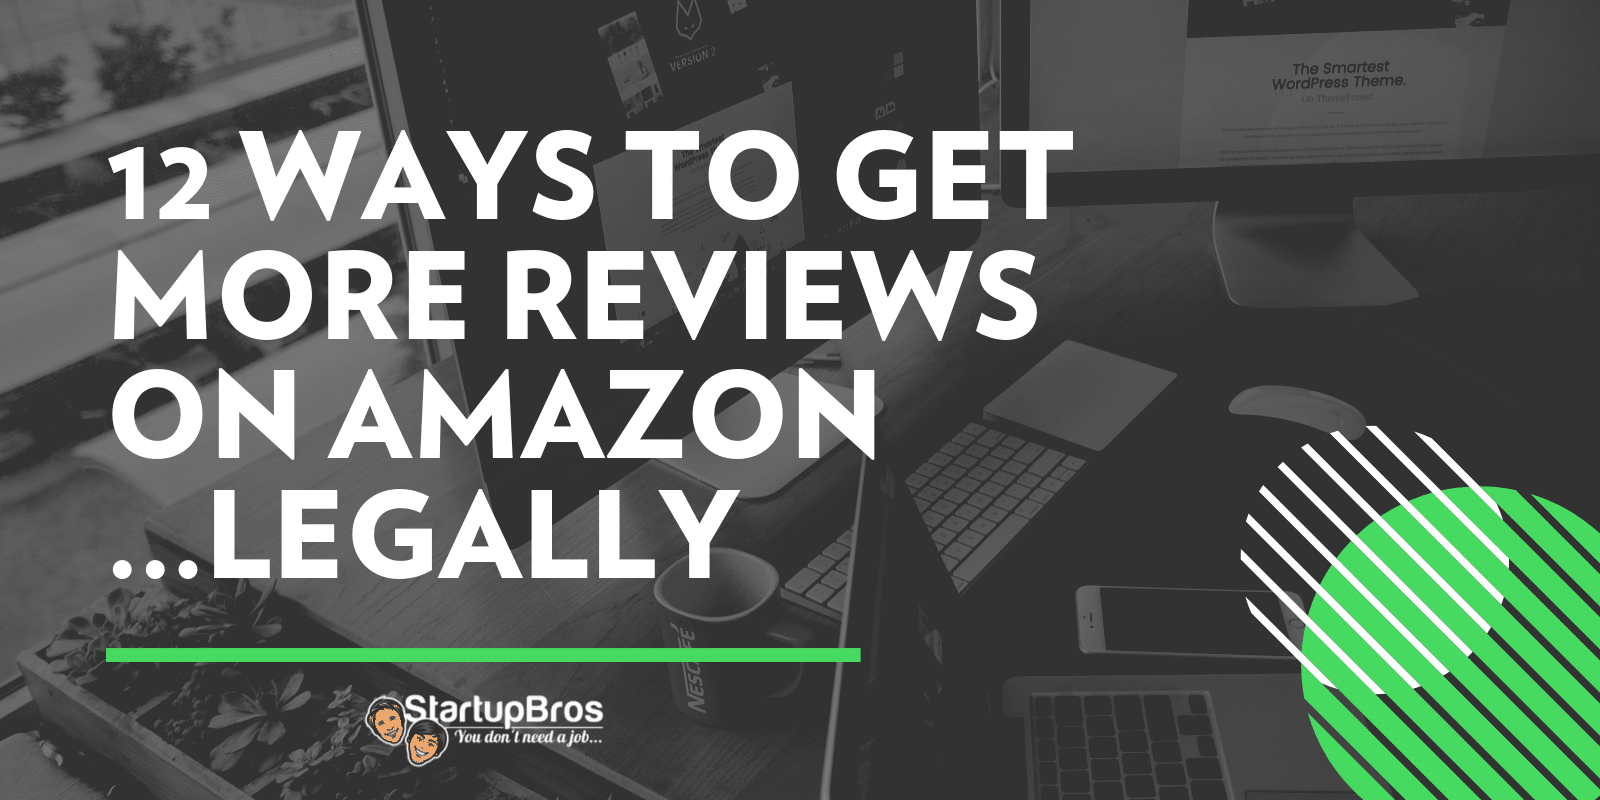 12 ways to get more reviews on amazon - social share